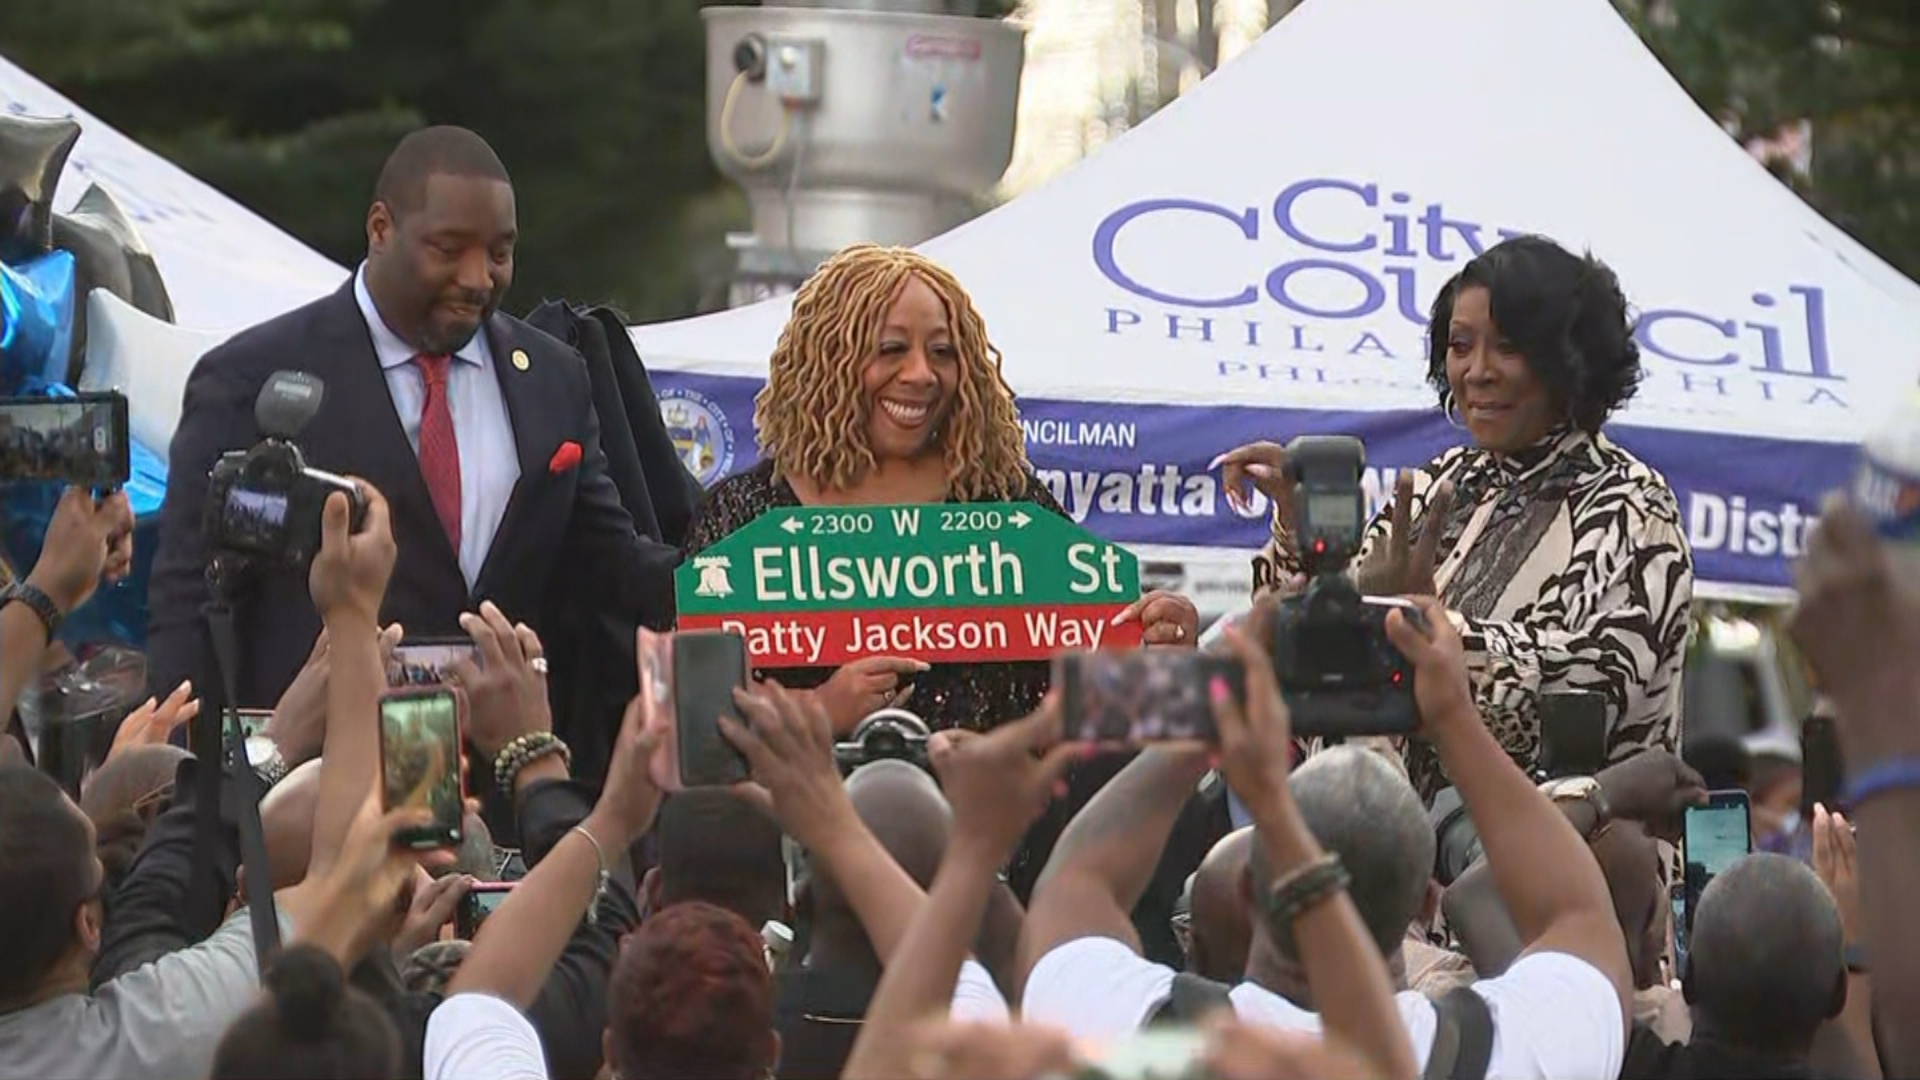 Patty Jackson, Philly Radio Legend, Has Street Named After Her In South Philadelphia